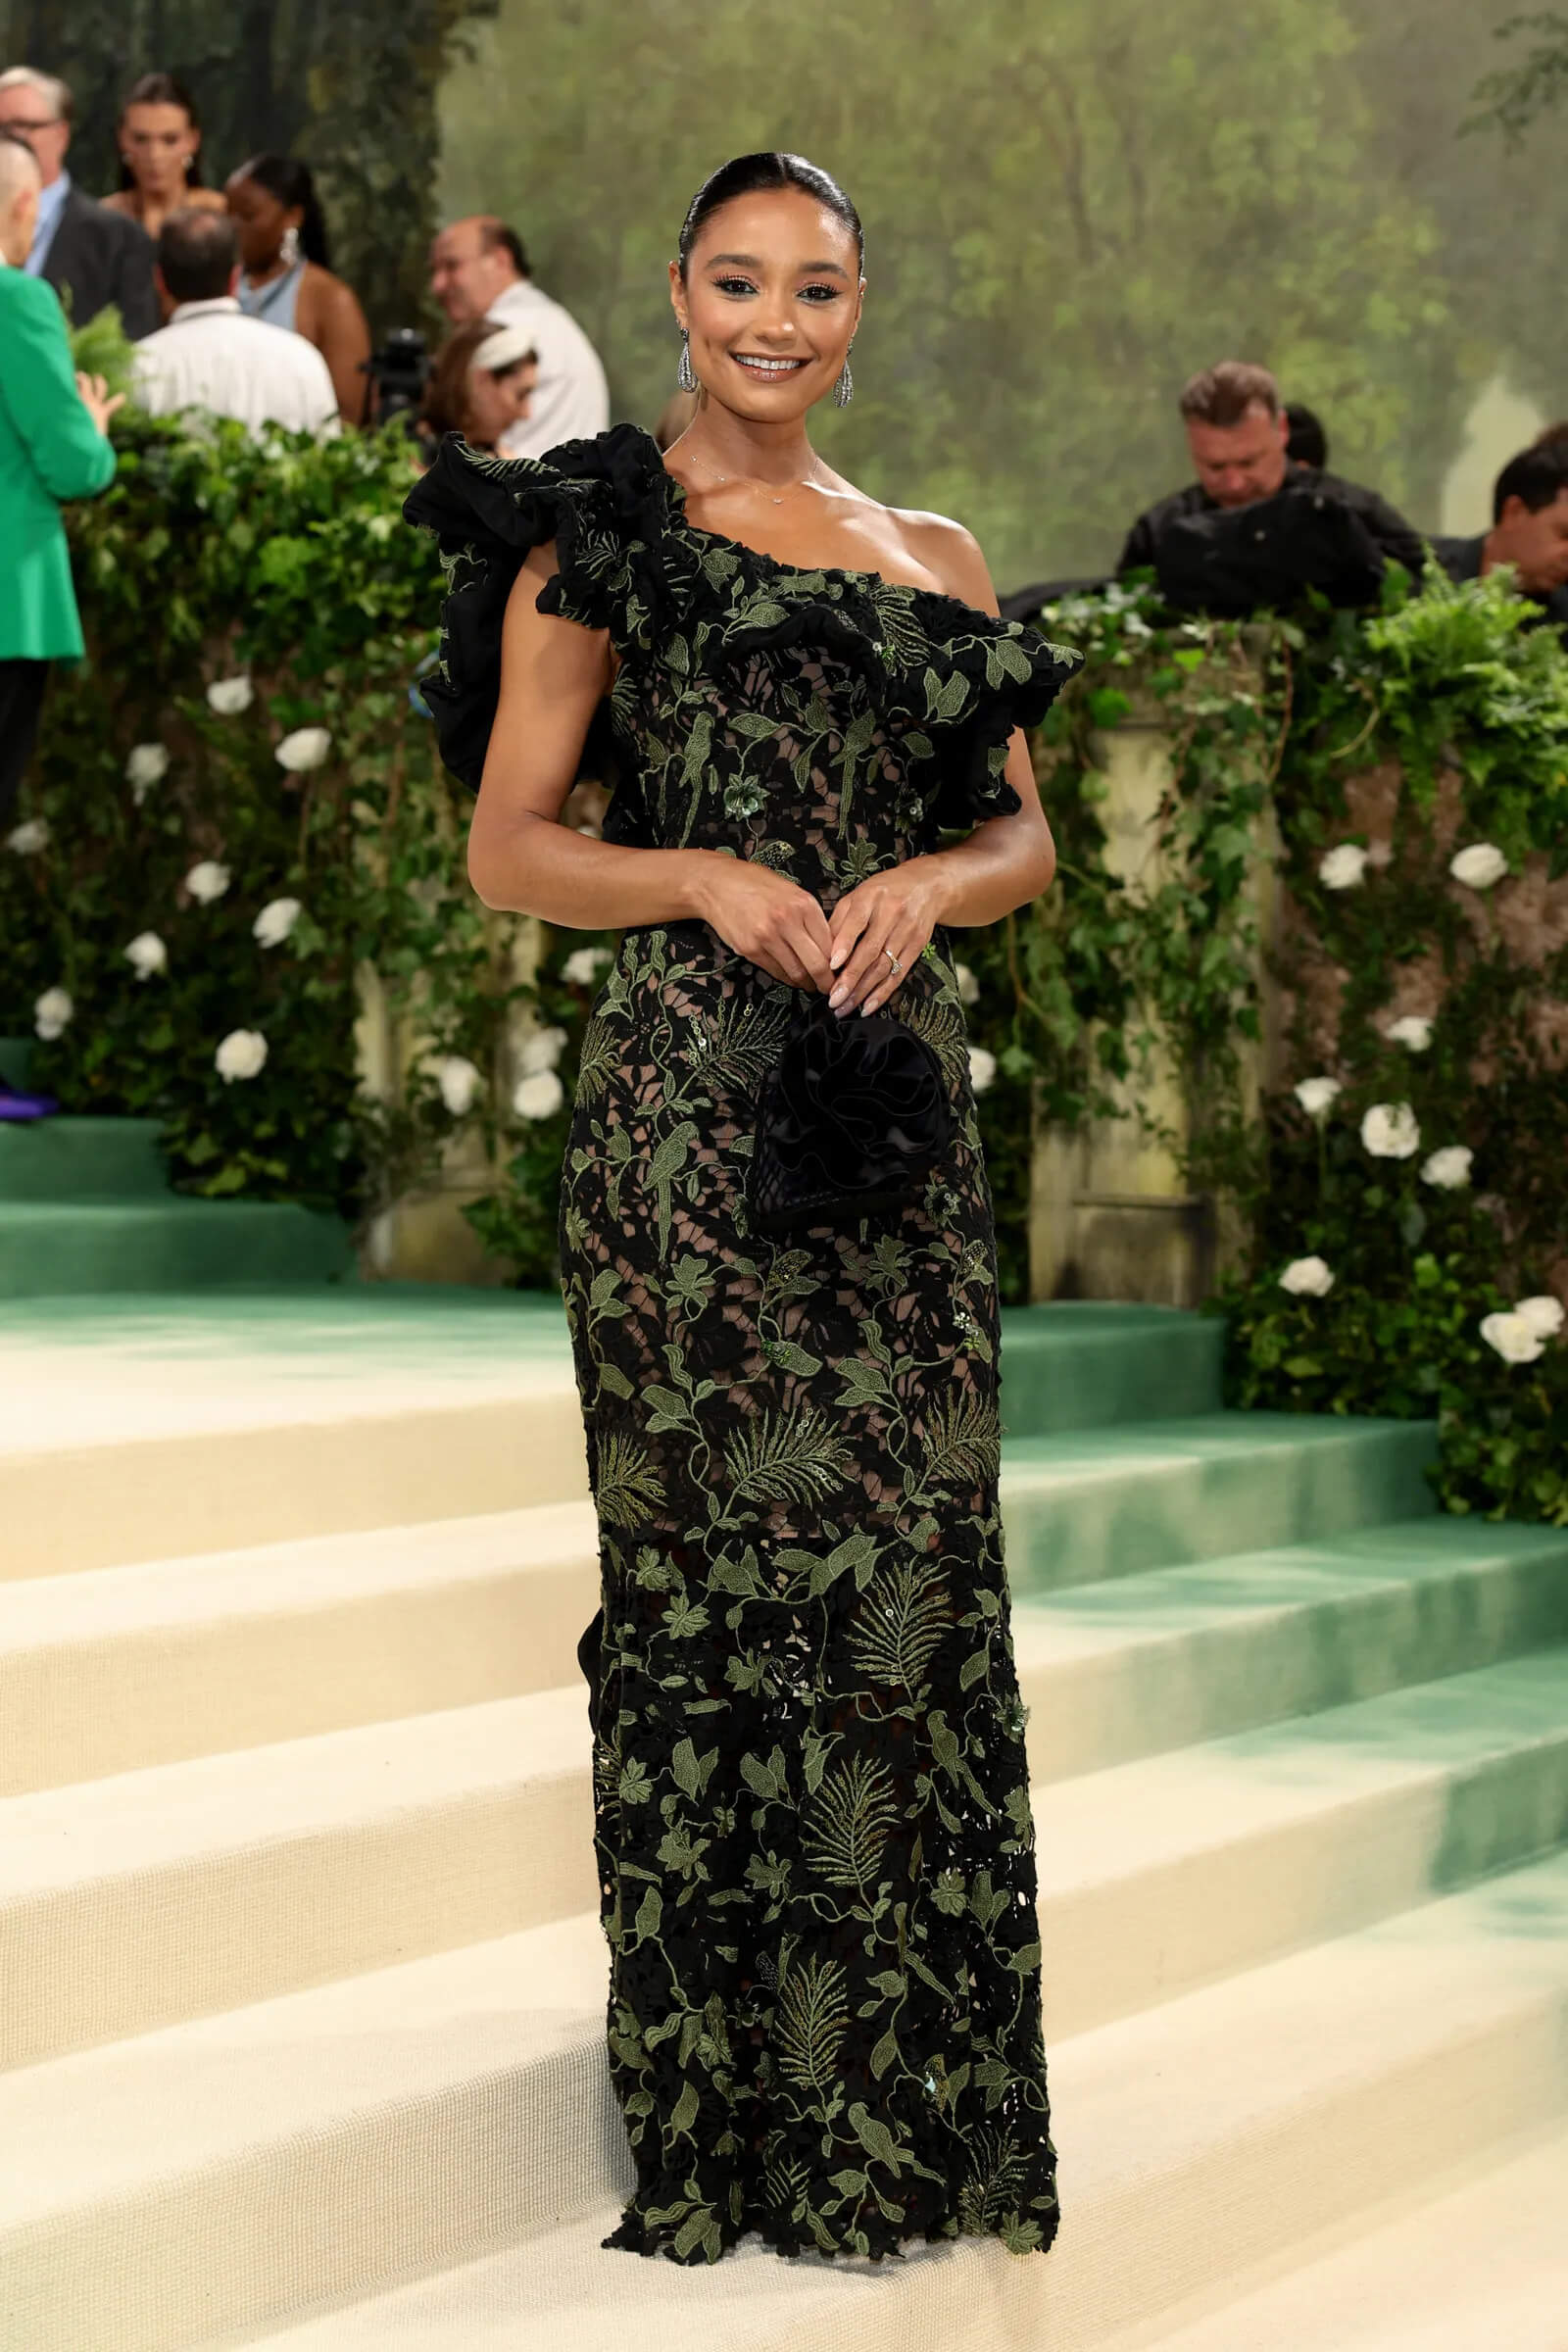 Rachel Smith In Olive Green Floral design Long Gown